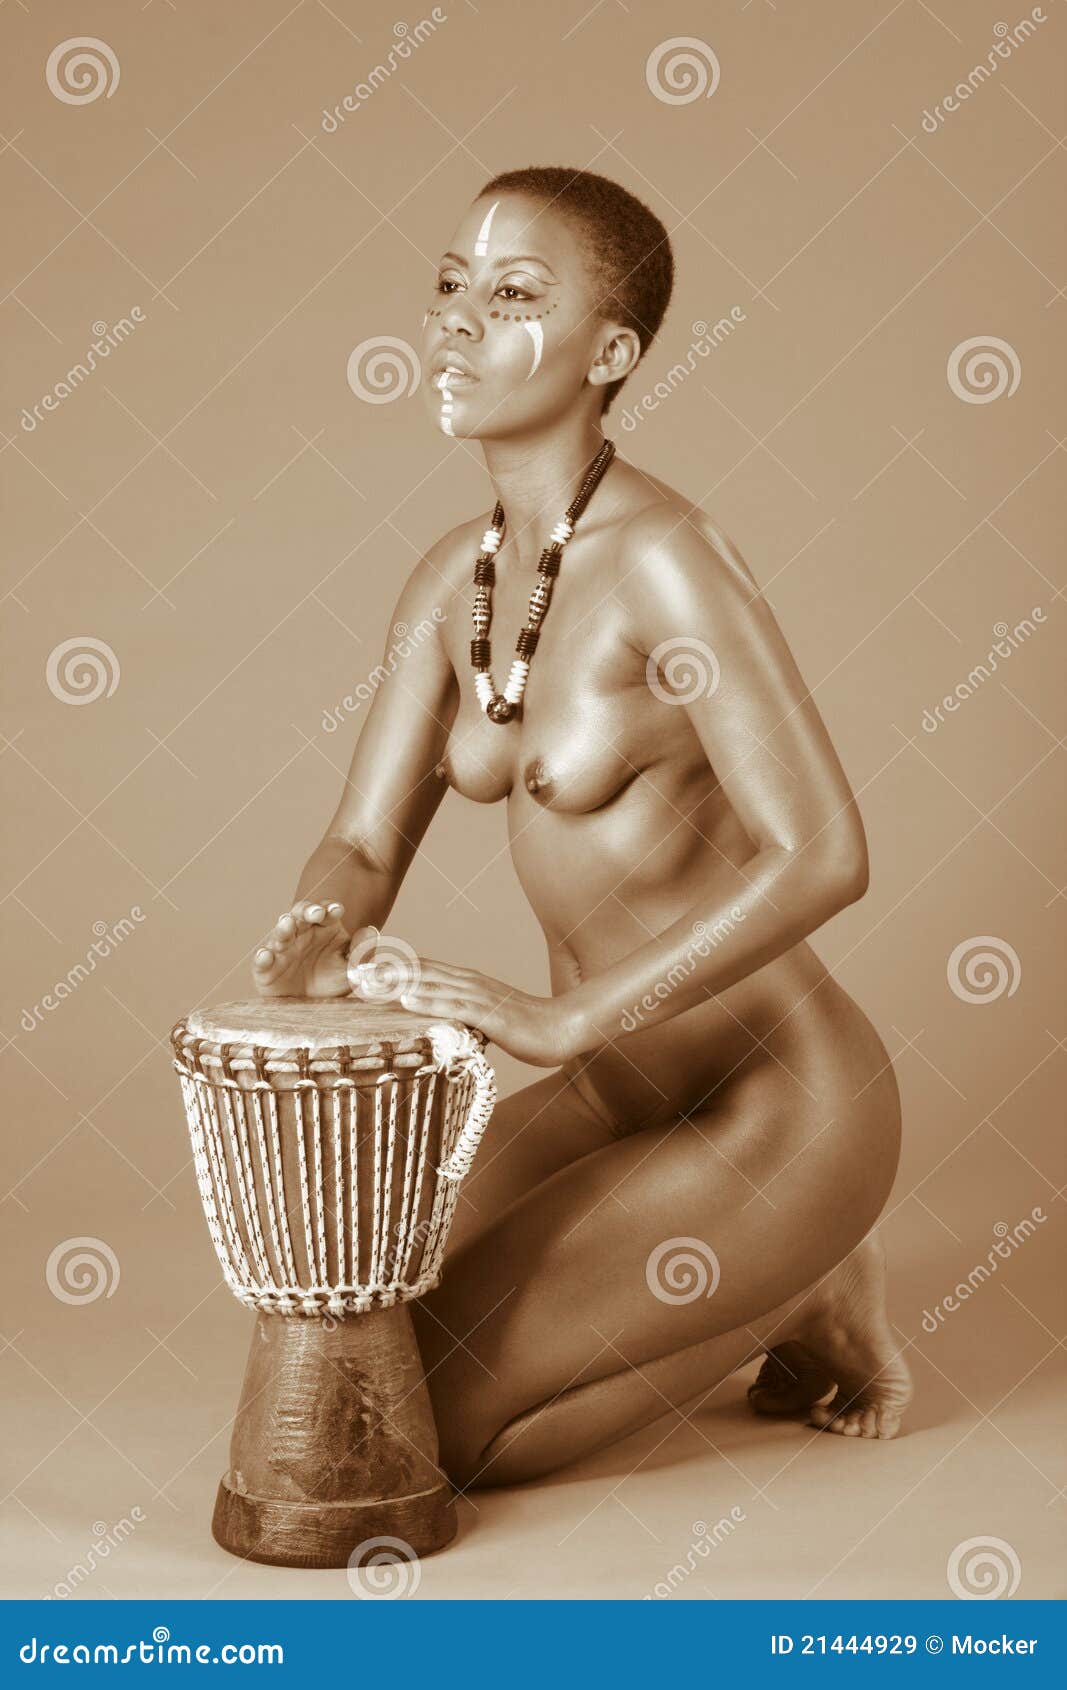 Bongo nude women Indigenous Nude African American Woman With Drums Stock Image Image Of Beautiful Boobs 21444929